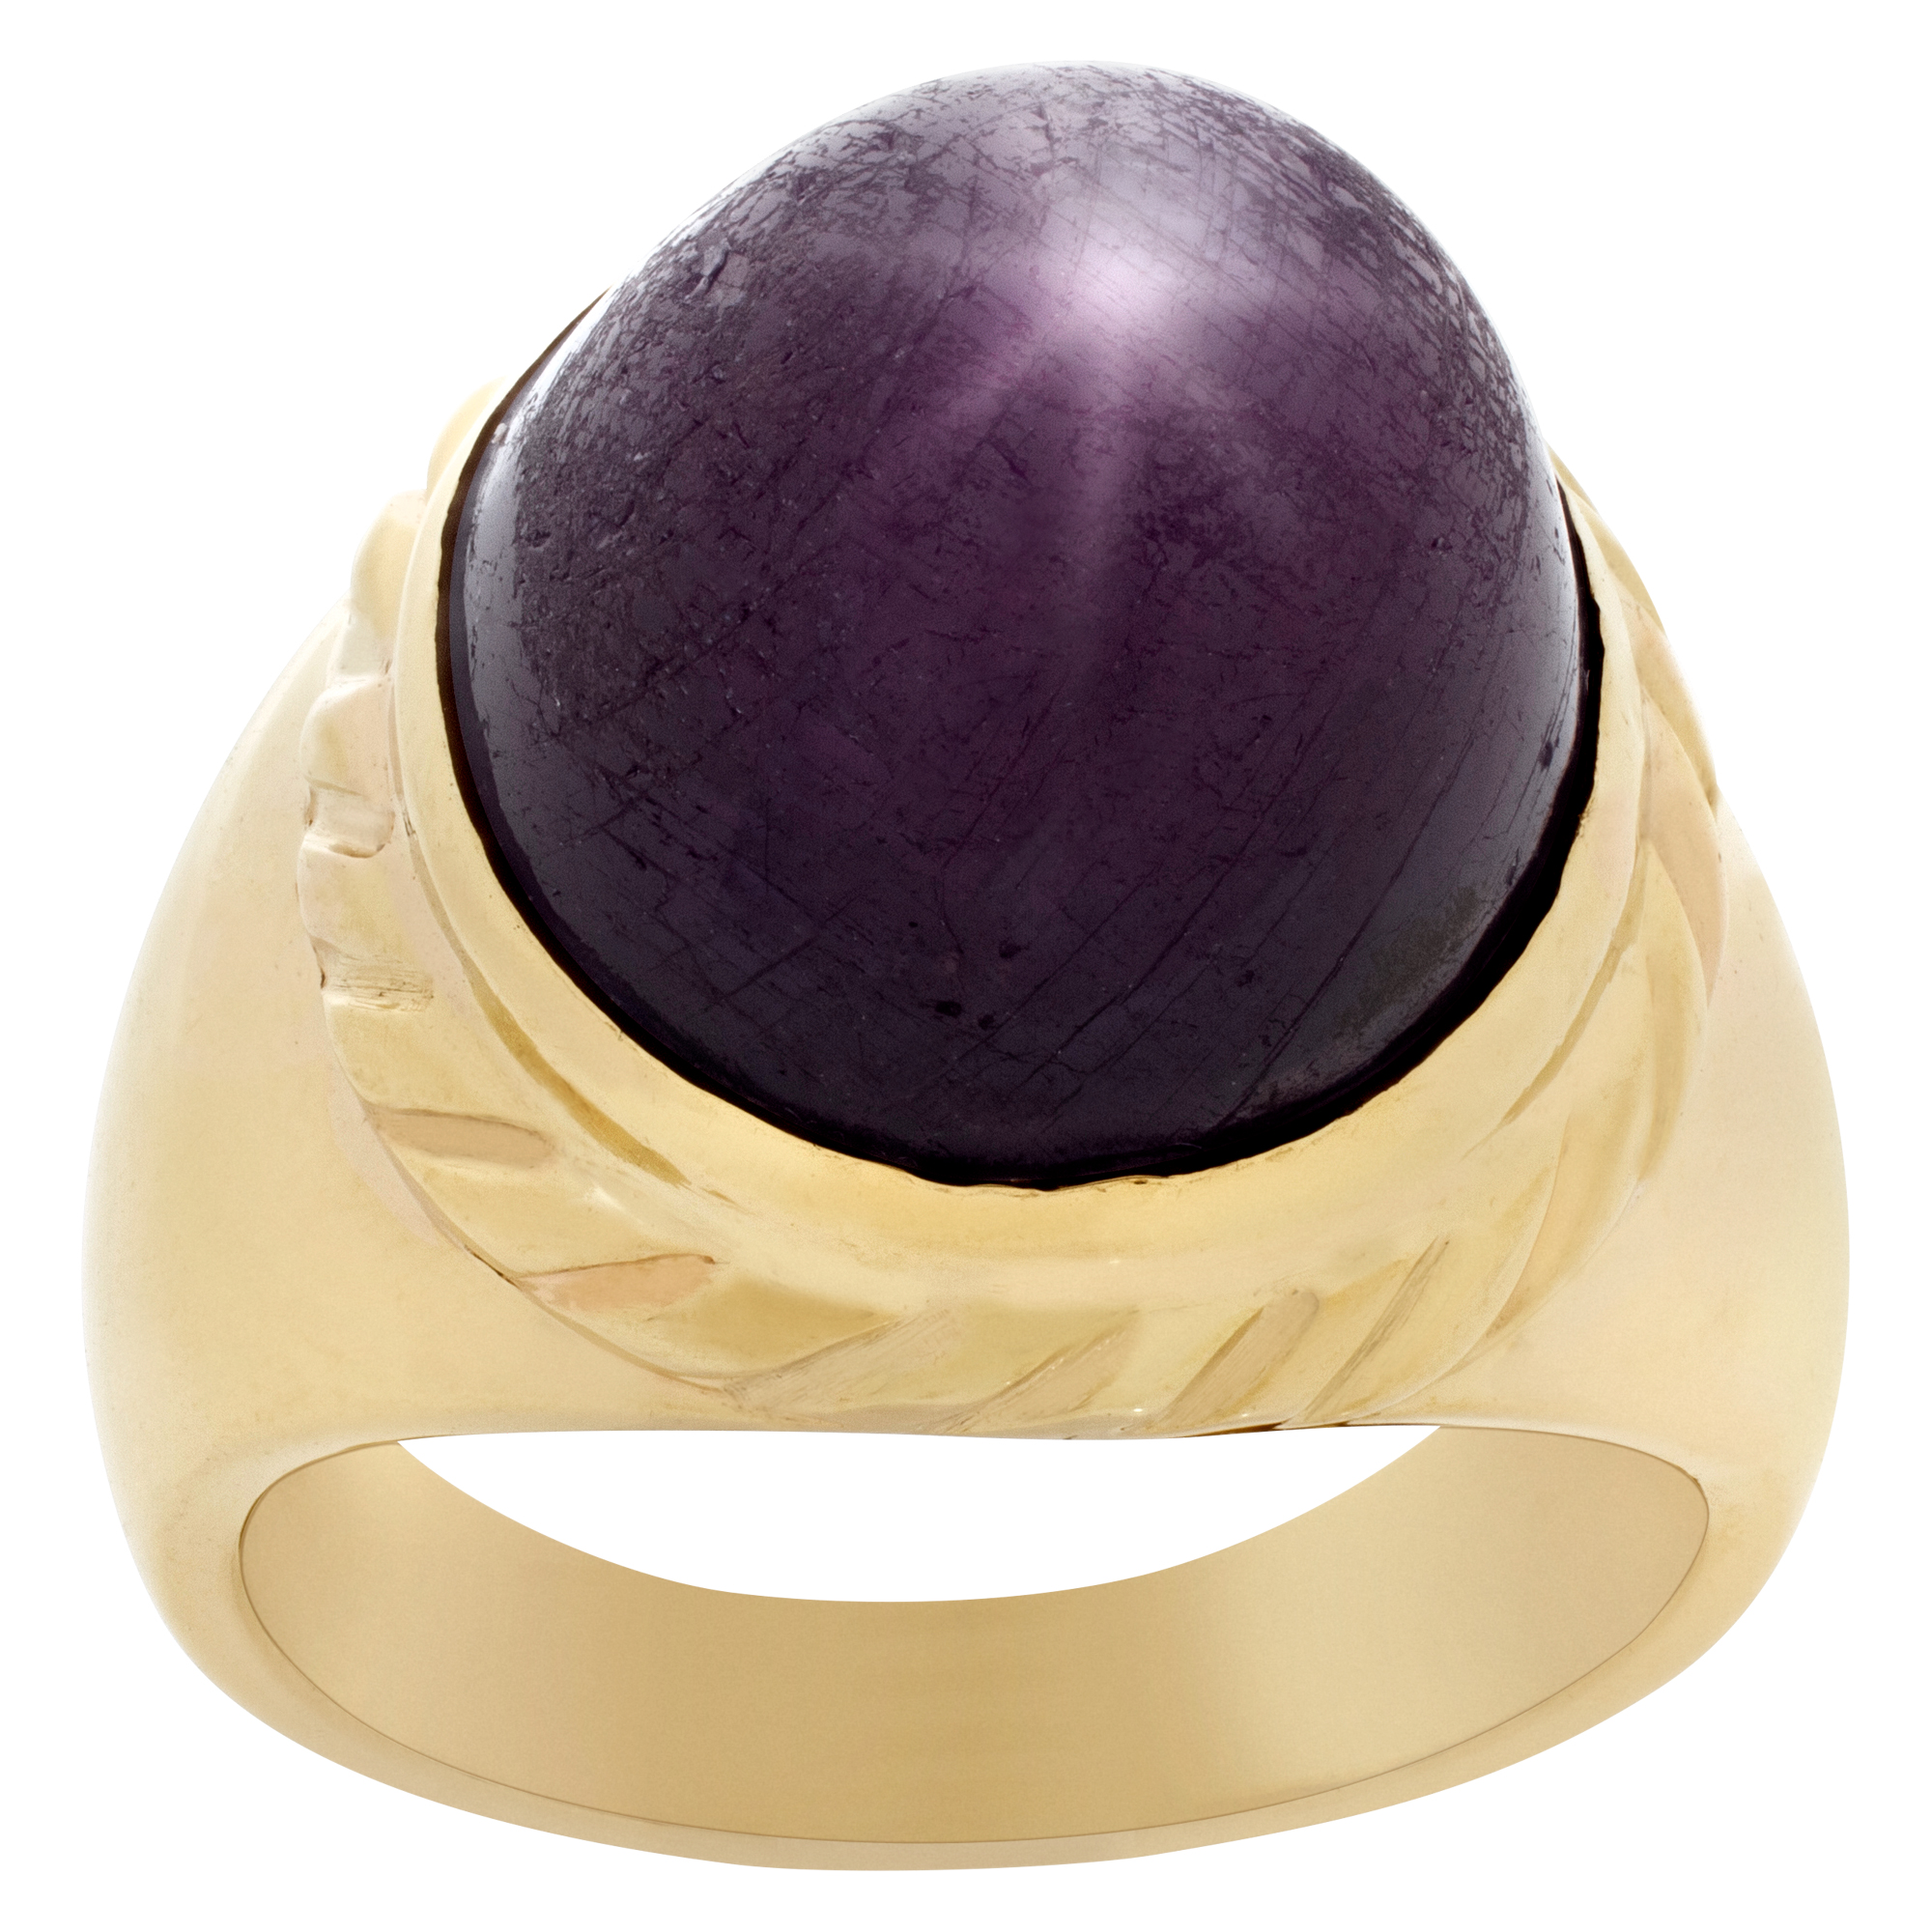 Cabochon star ruby ring in 14k yellow gold, total approx. weight: over 15 carats.